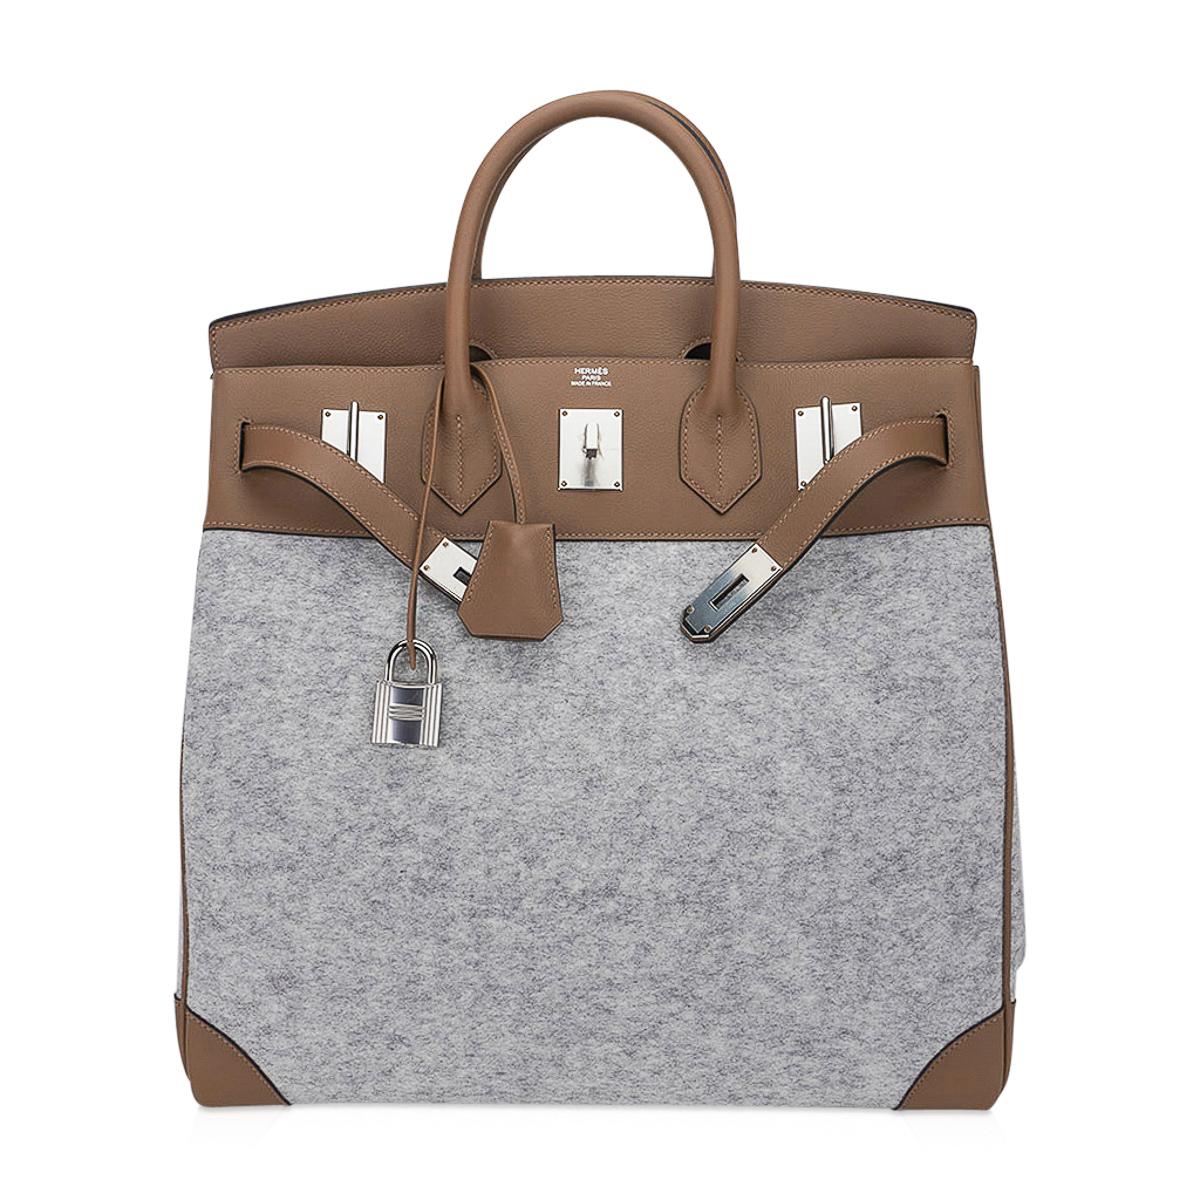 Mightychic offers a rare limited edition Hermes HAC 40 bag featured in Gris Clair Todoo Feutre (Wool) and Etoupe Evercolor leather.
A chic and masculine combination for this rare Hermes classic bag.
Beautiful Light gray this tote bag is neutral